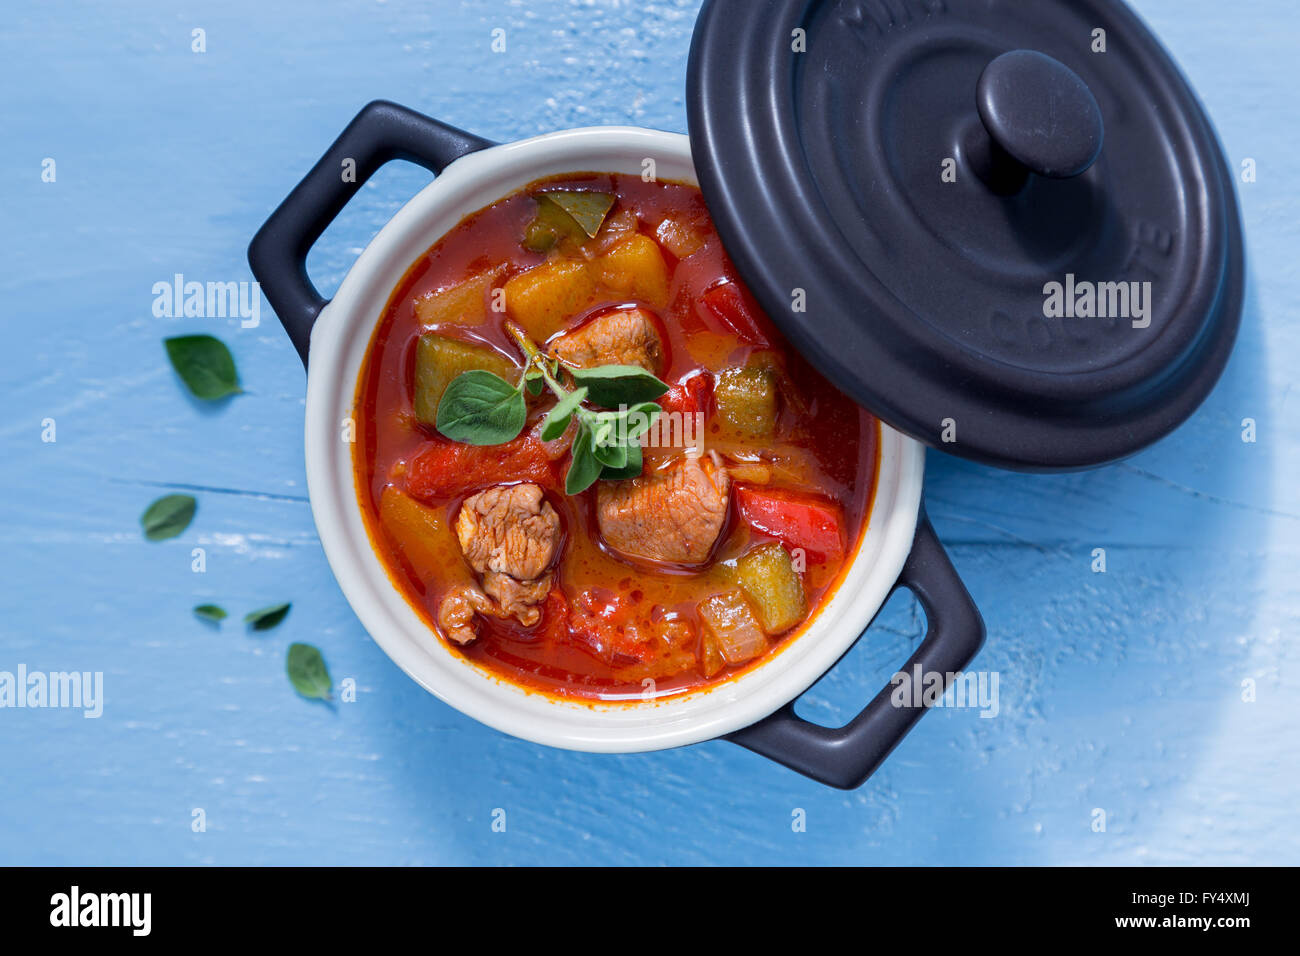 Goulash in a black cocotte with marjoram on blue wood. Stock Photo